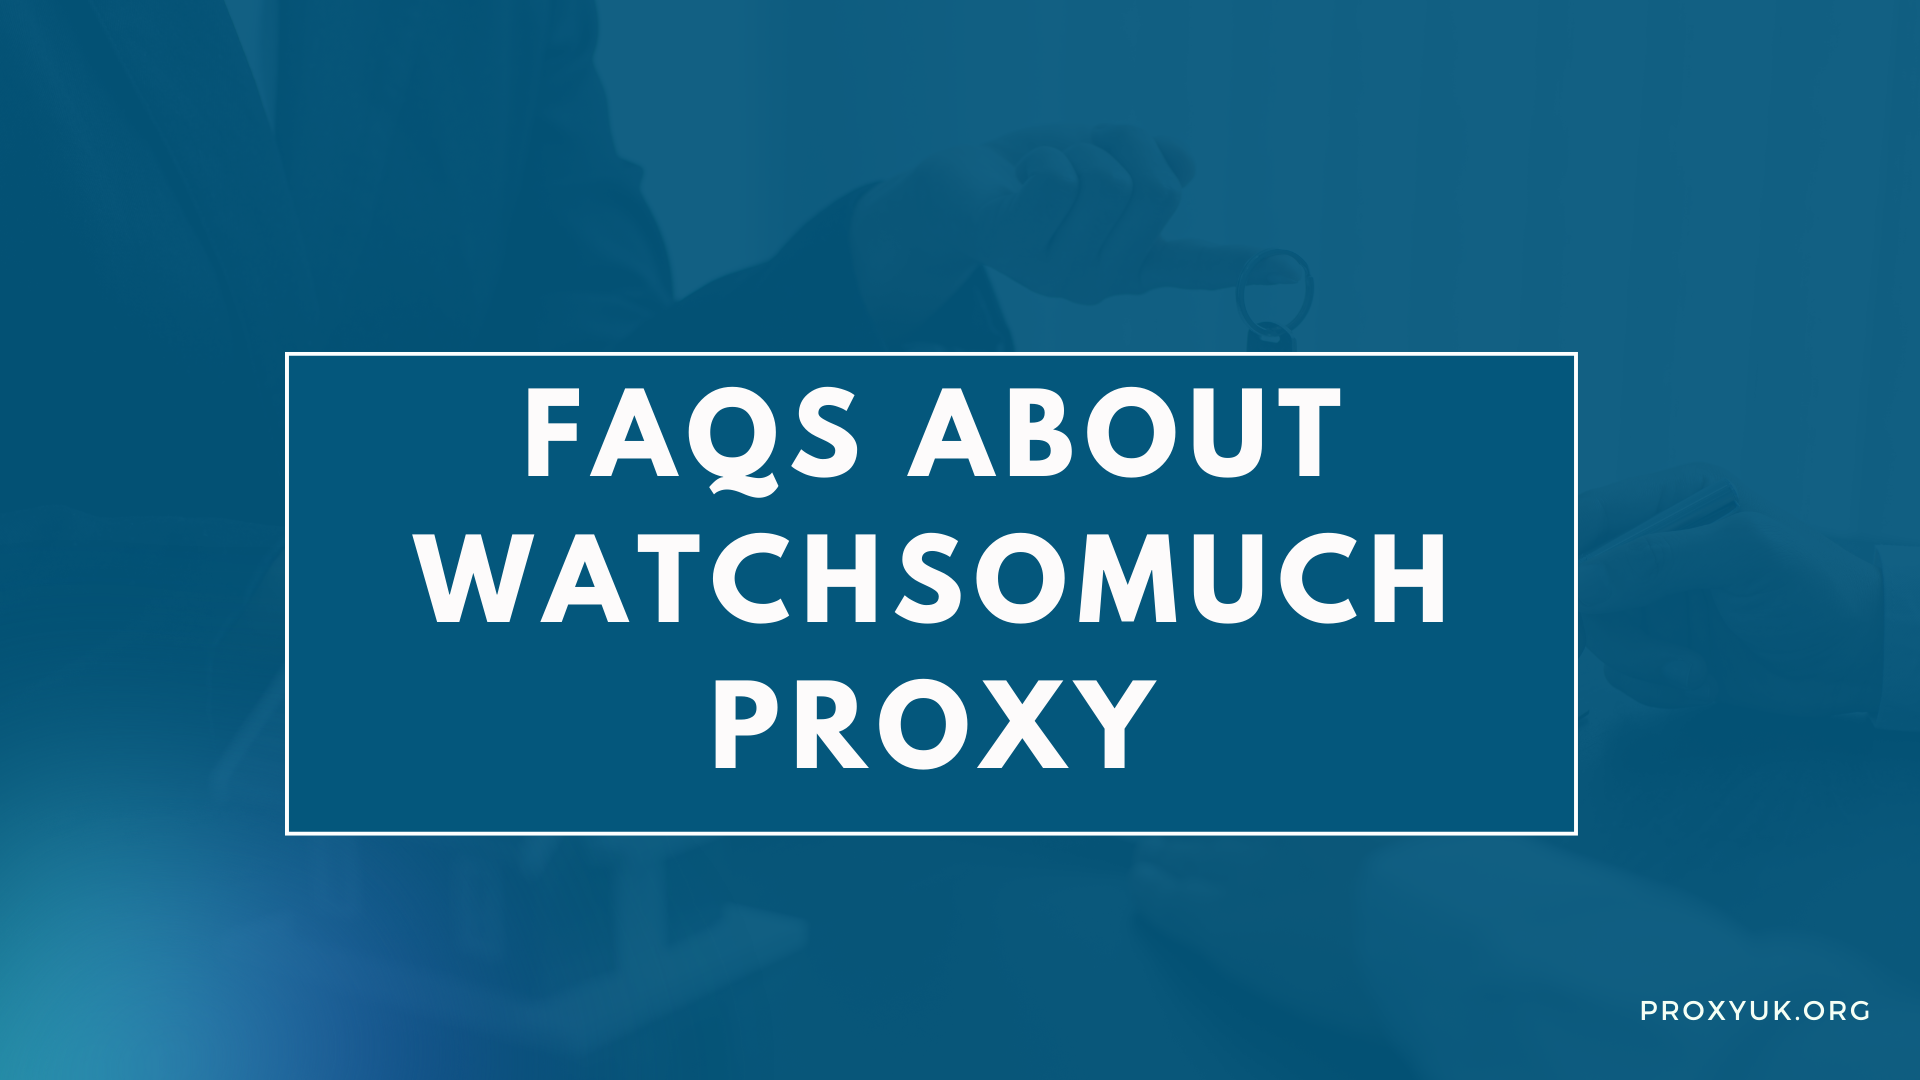 FAQs about WatchSoMuch proxy